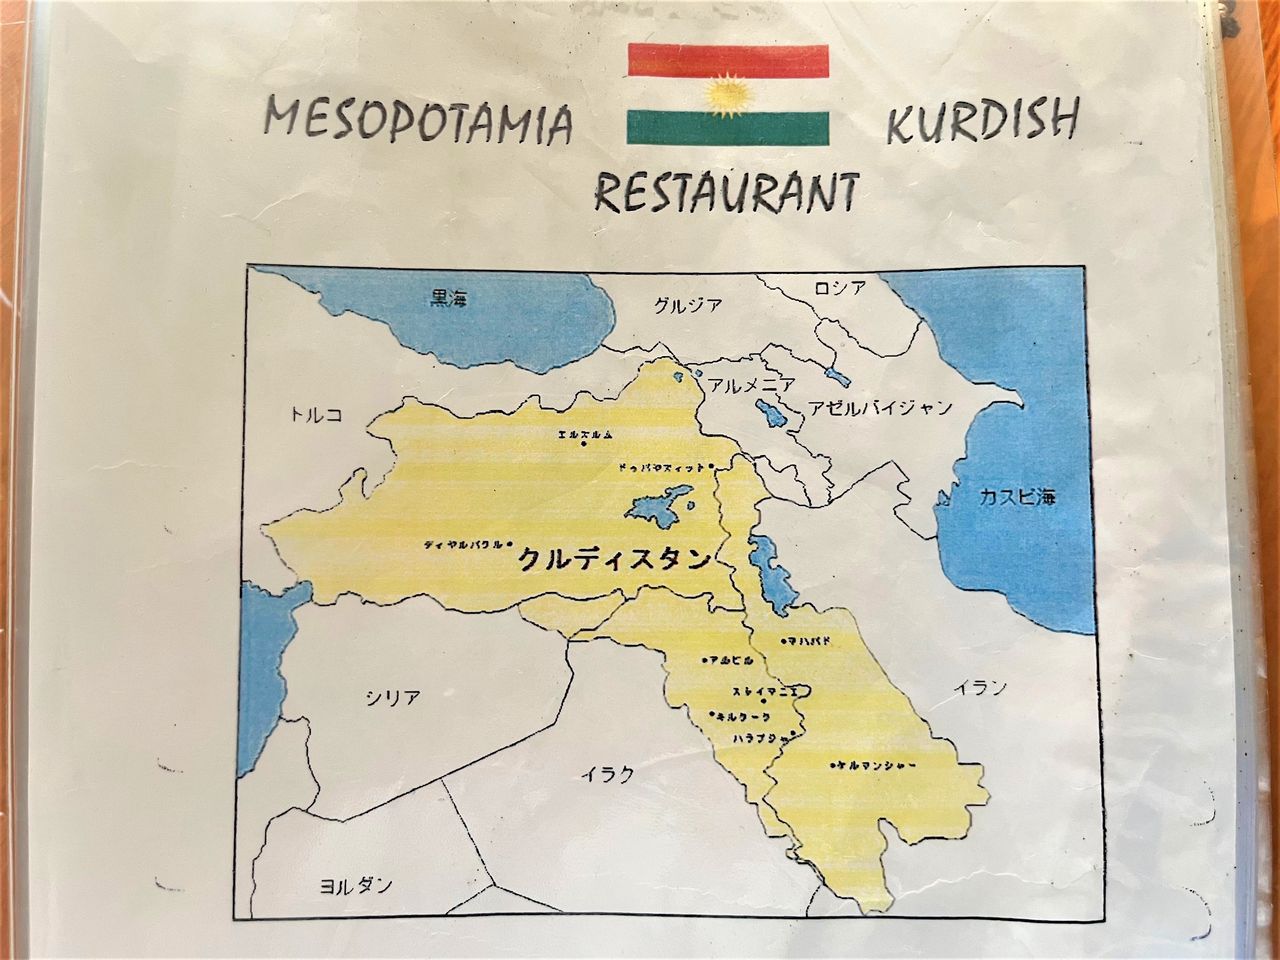 In addition to food, the menu also features a map of the Kurdistani areas and basic information on the region.